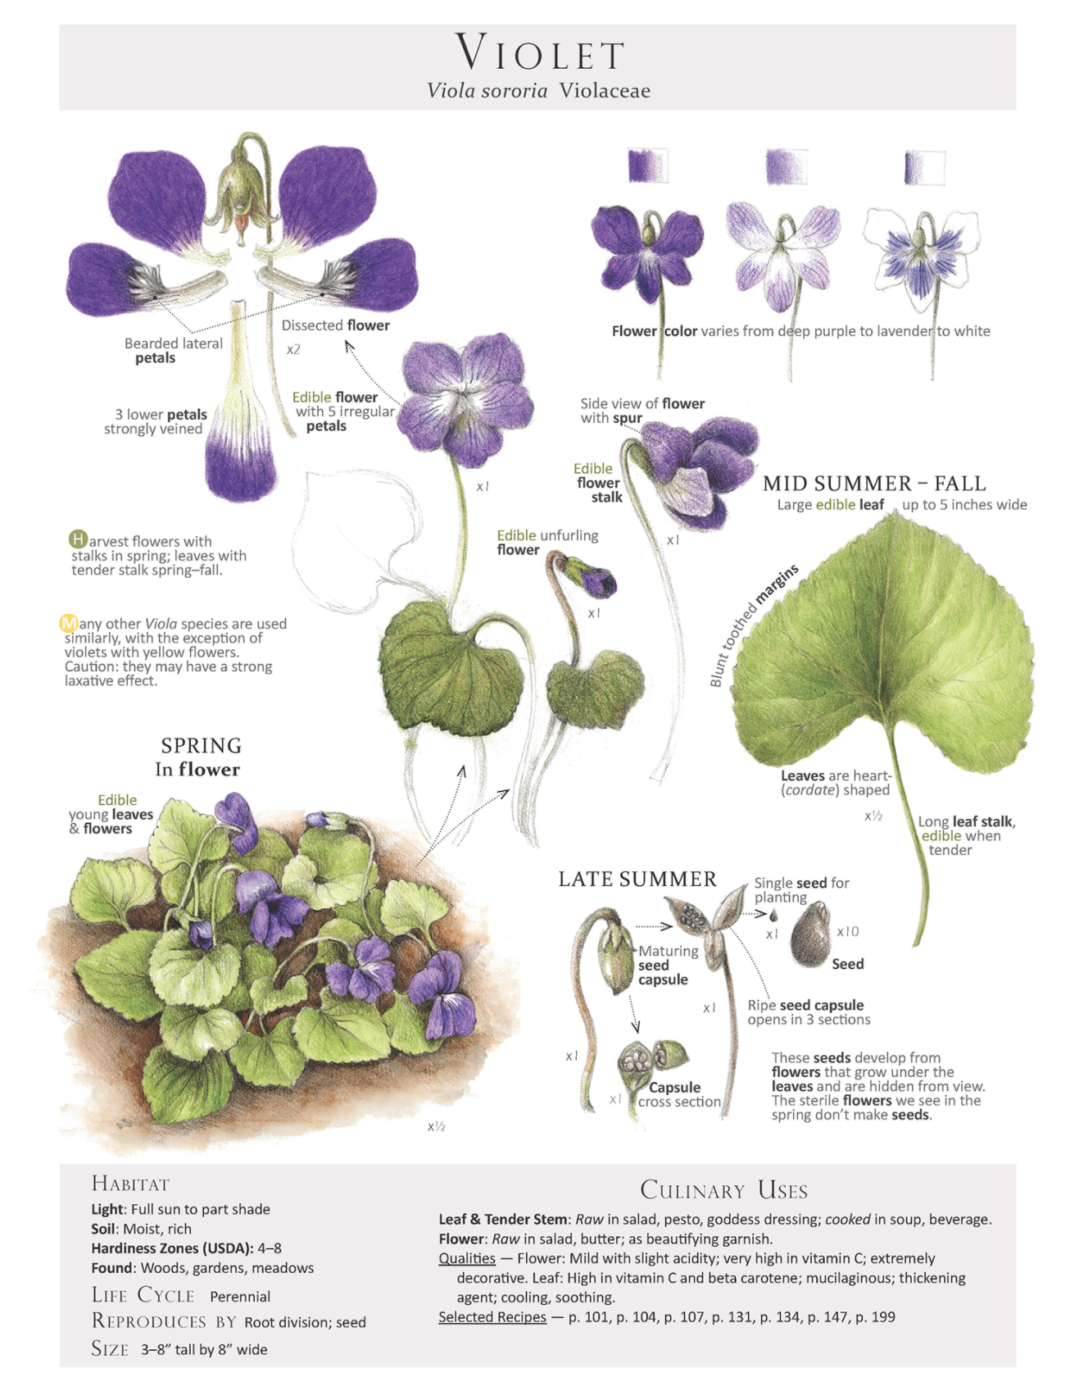 A page about violets from the book Foraging & Feasting: A Field Guide and Wild Food Cookbook by Dina Falconi; illustrated by Wendy Hollender.